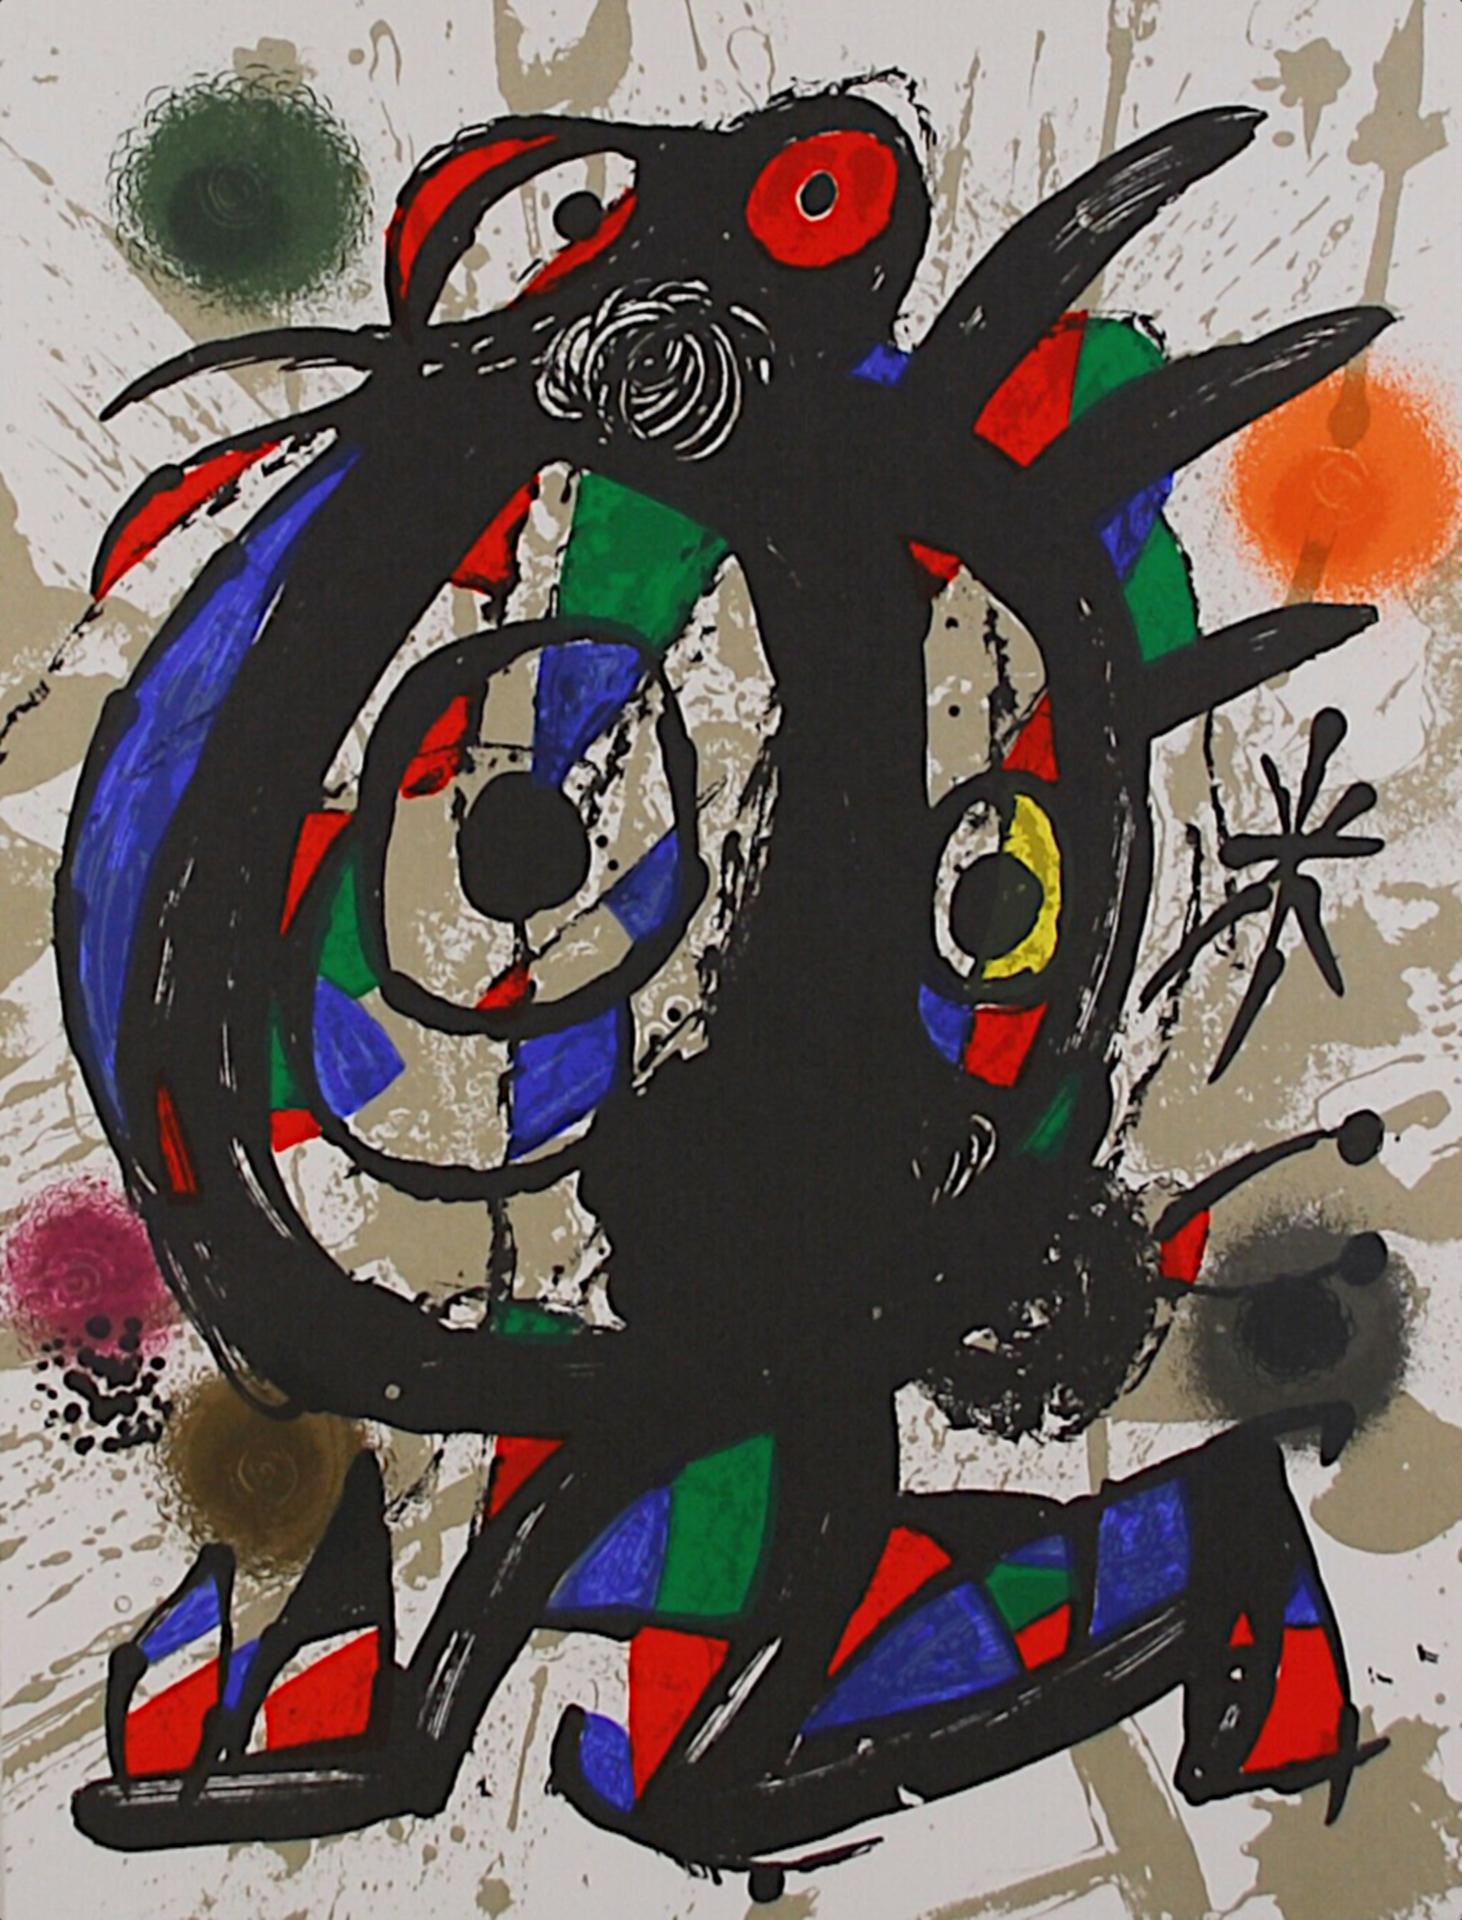 From: Litografo (Band III), spanish edition.

Verso typographically marked: 'Joan Miro - Litografia original I'.

Publisher: Ediciones Poligrafa, S.A., Barcelona.

Miró's development of a new pictorial language led to a consistent restriction to the